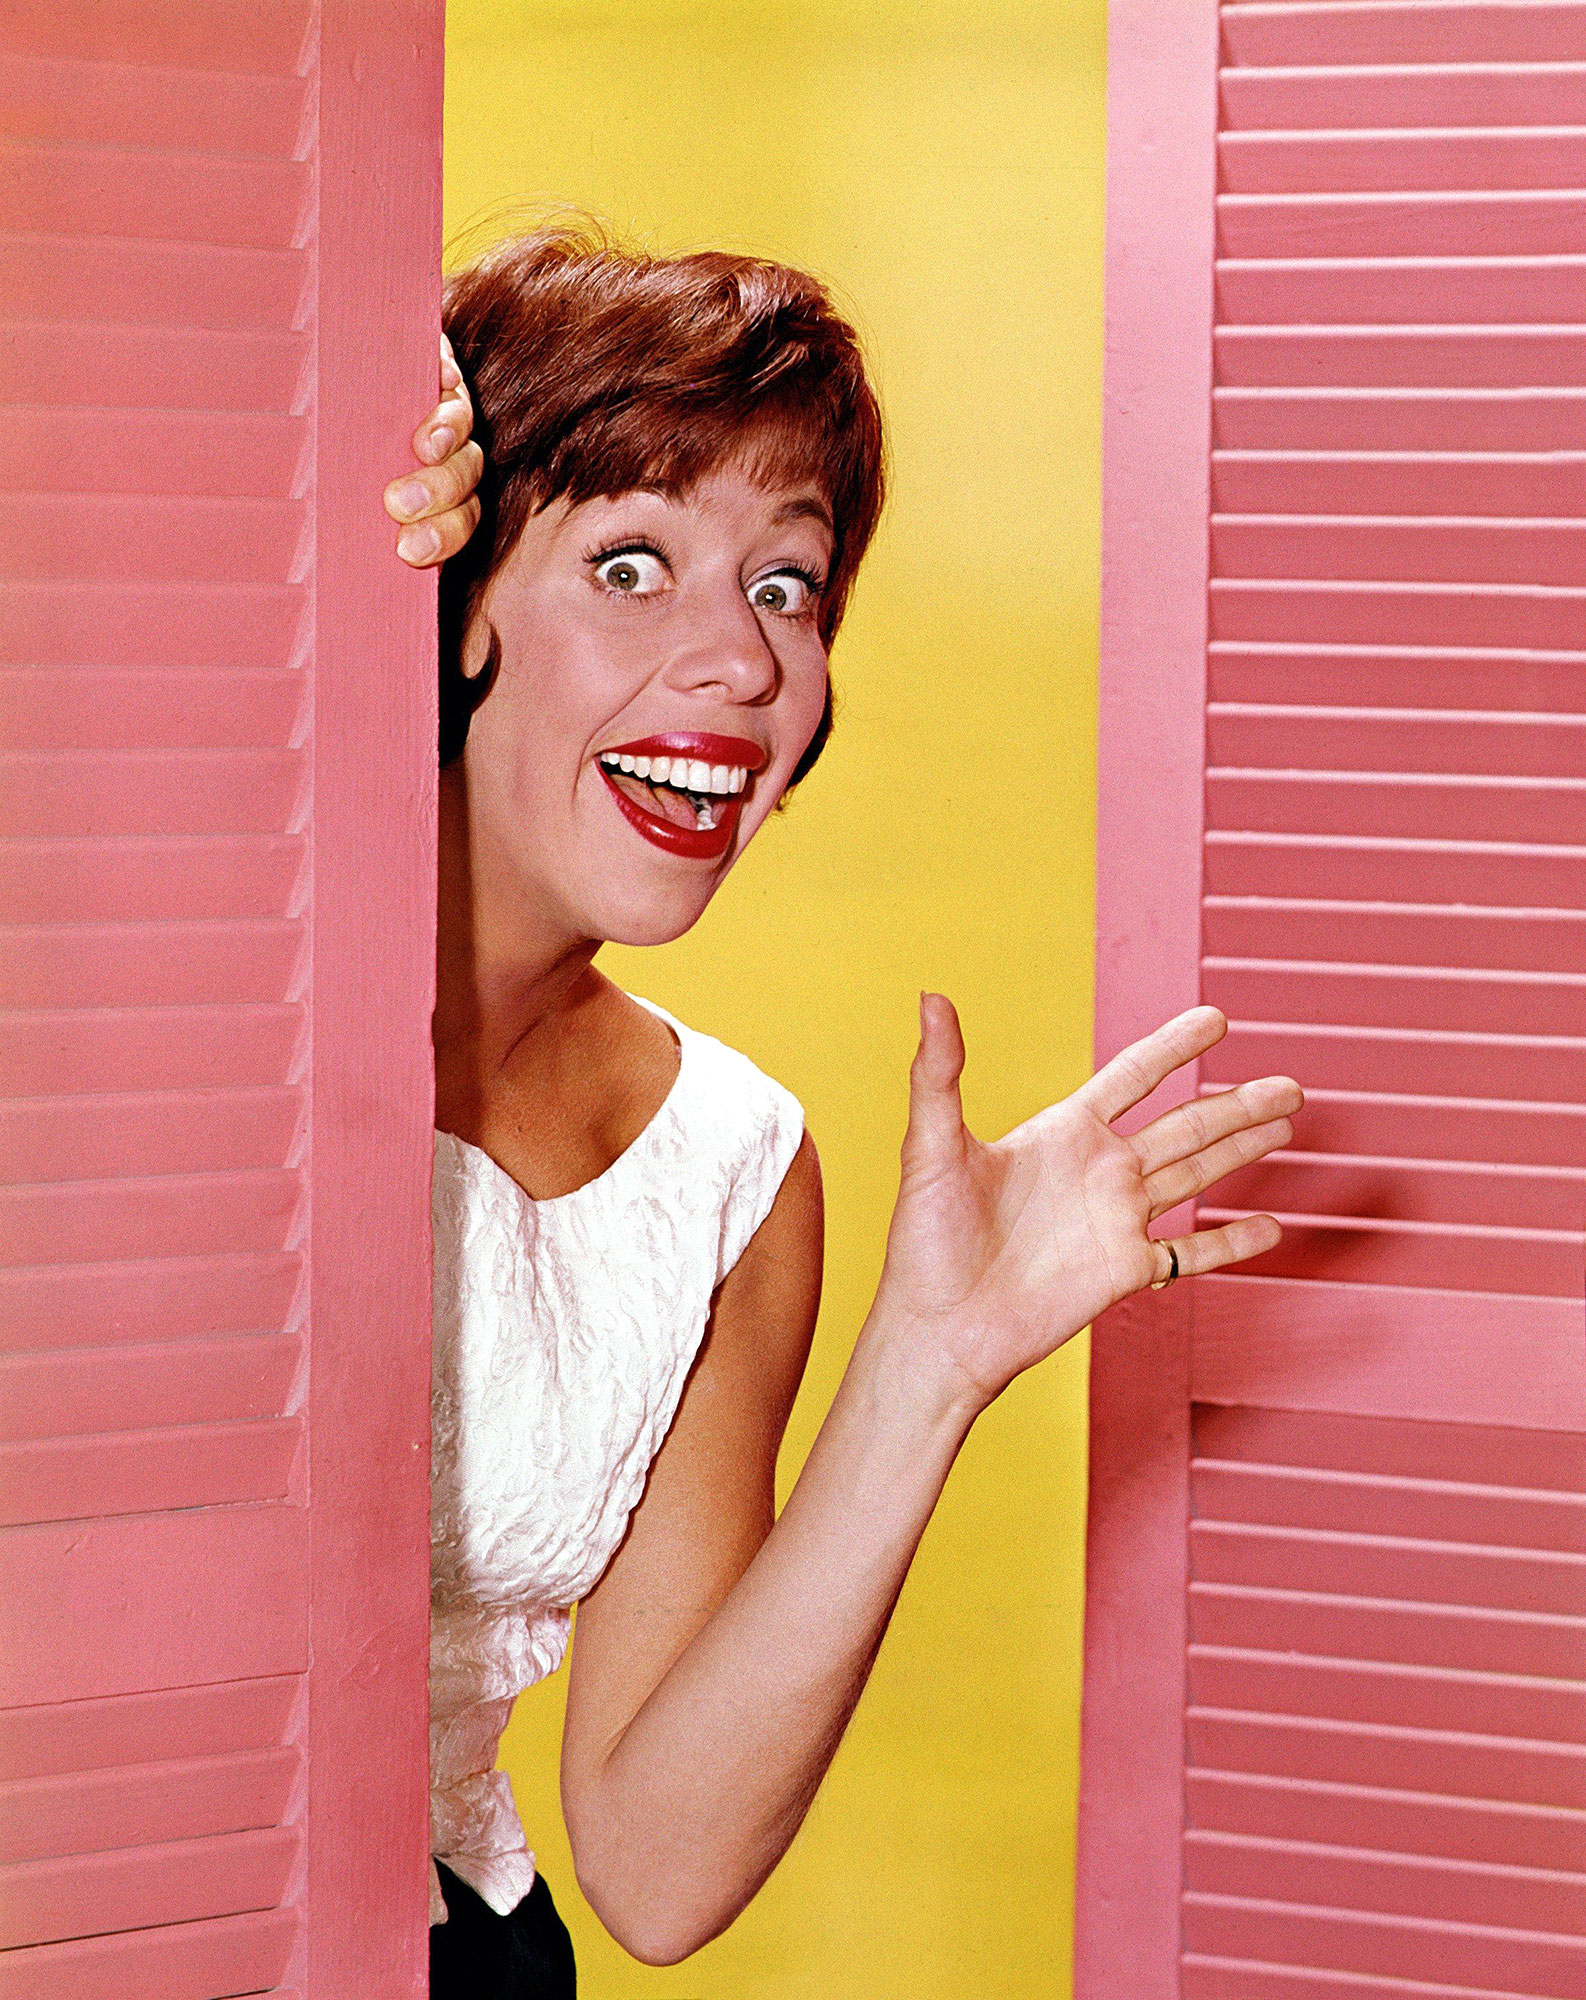 The Carol Burnett Show Which TV Shows Have the Most Emmys Wins